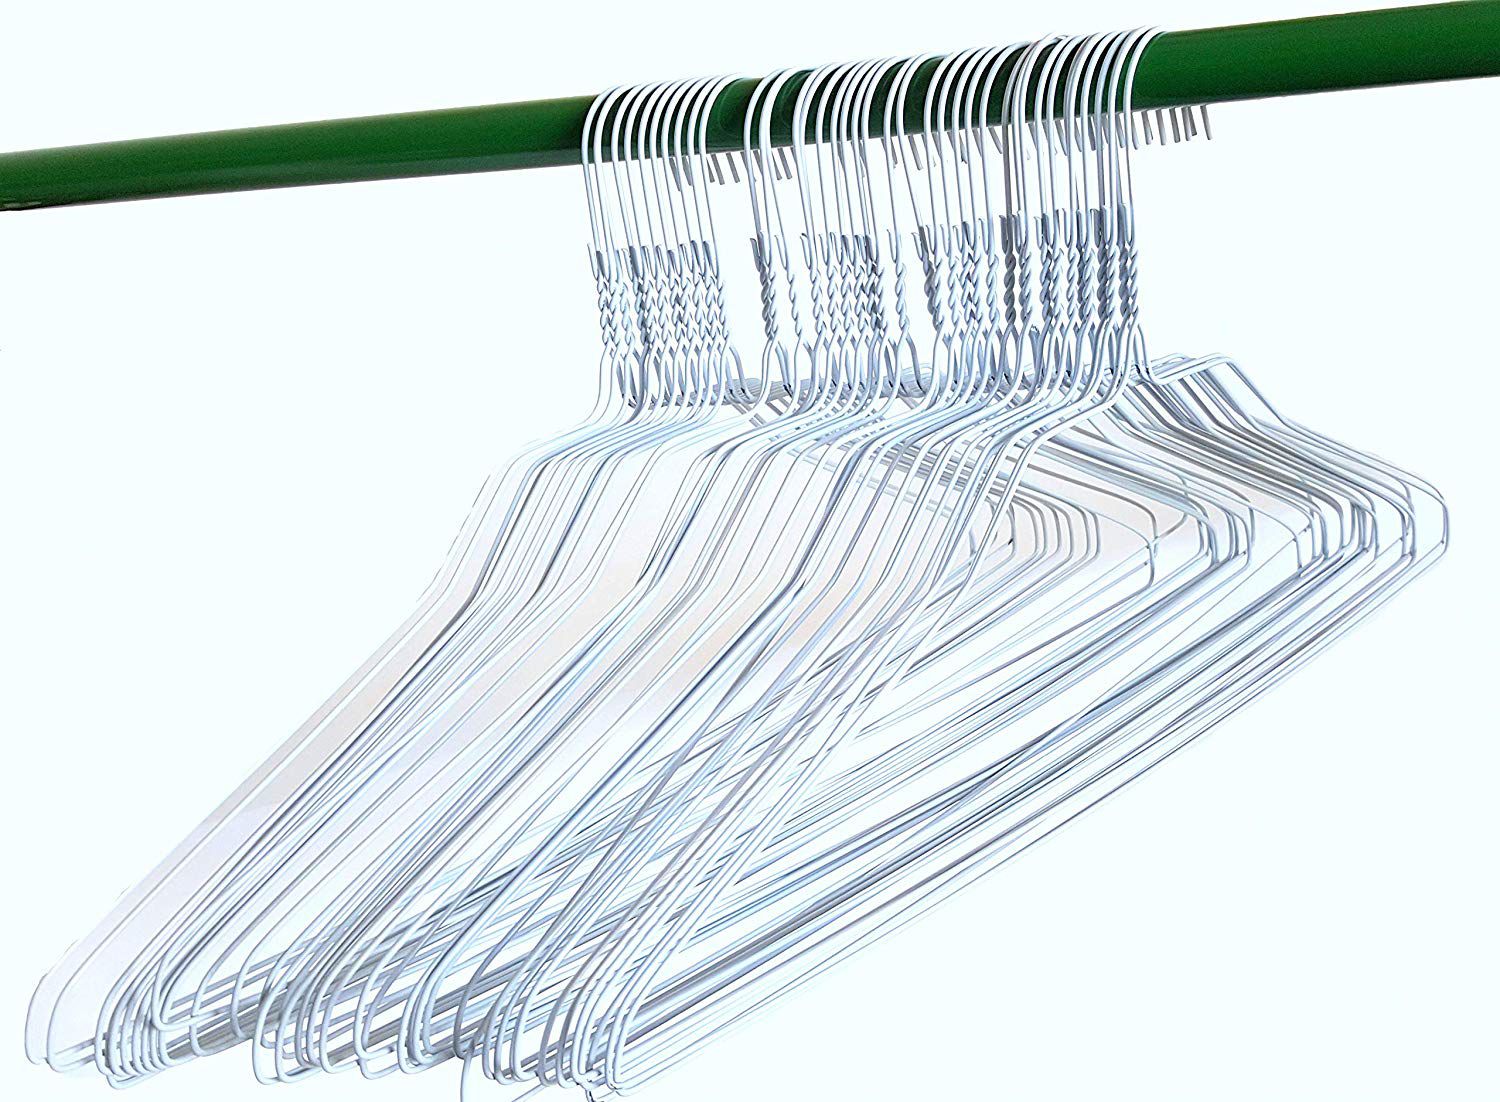 Products  M&B Hangers - Professional-Grade, Commercial Hangers